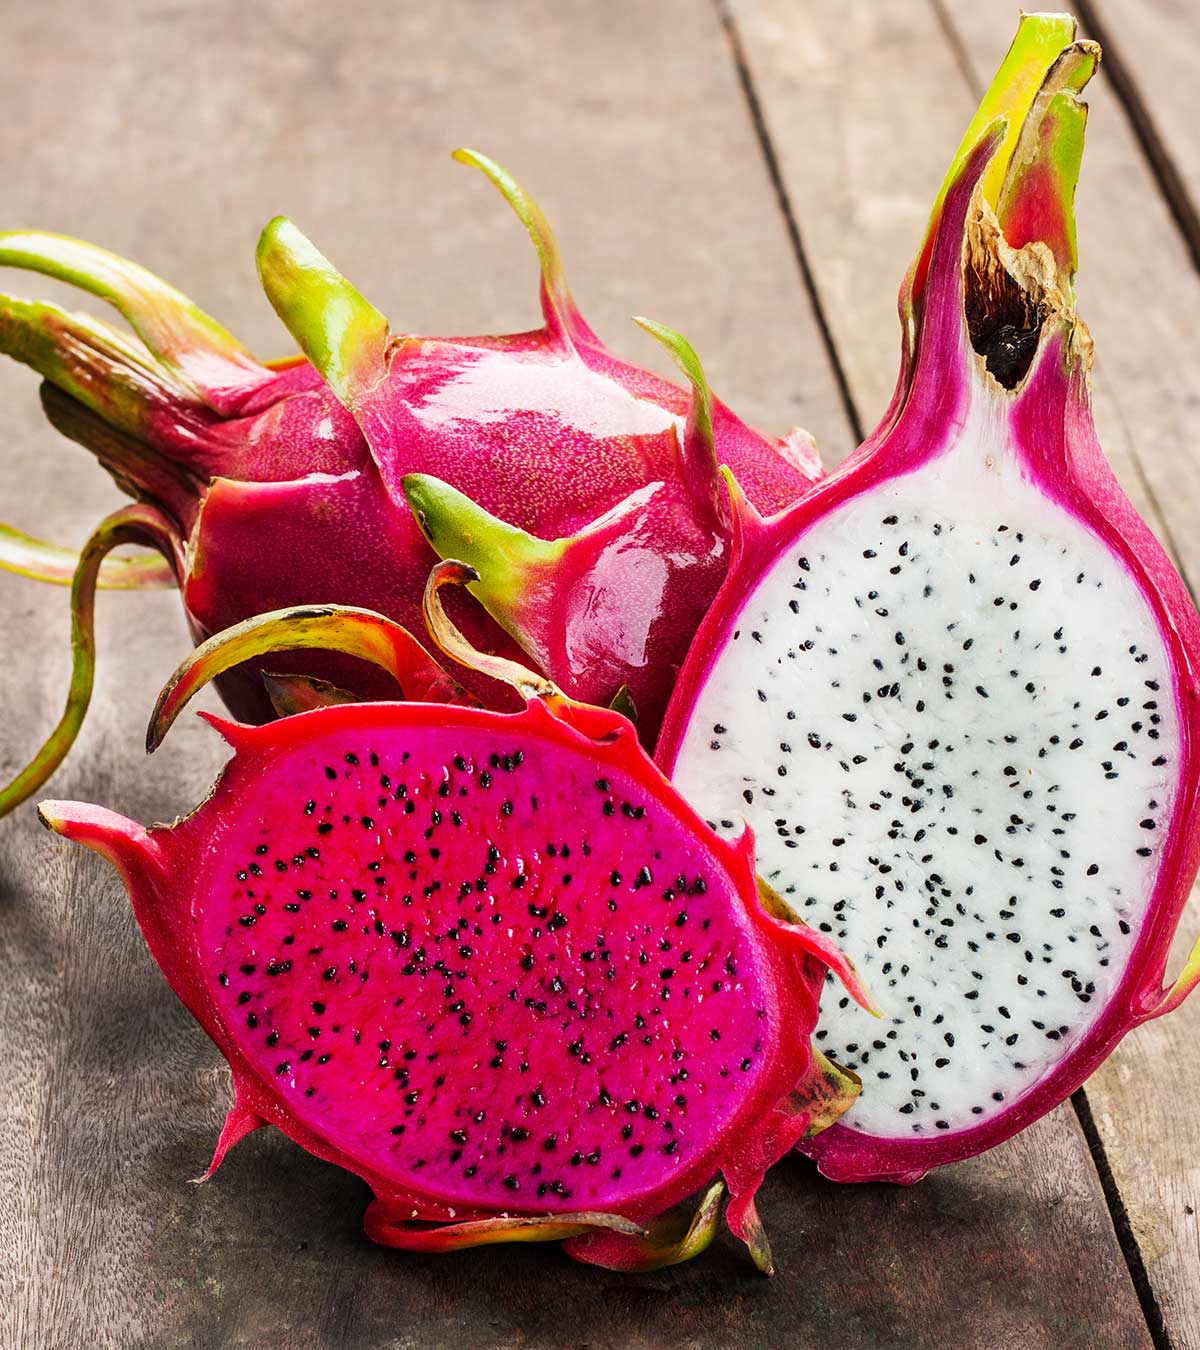 Dragon Fruit In Pregnancy: Safety, Benefits, And Side Effects